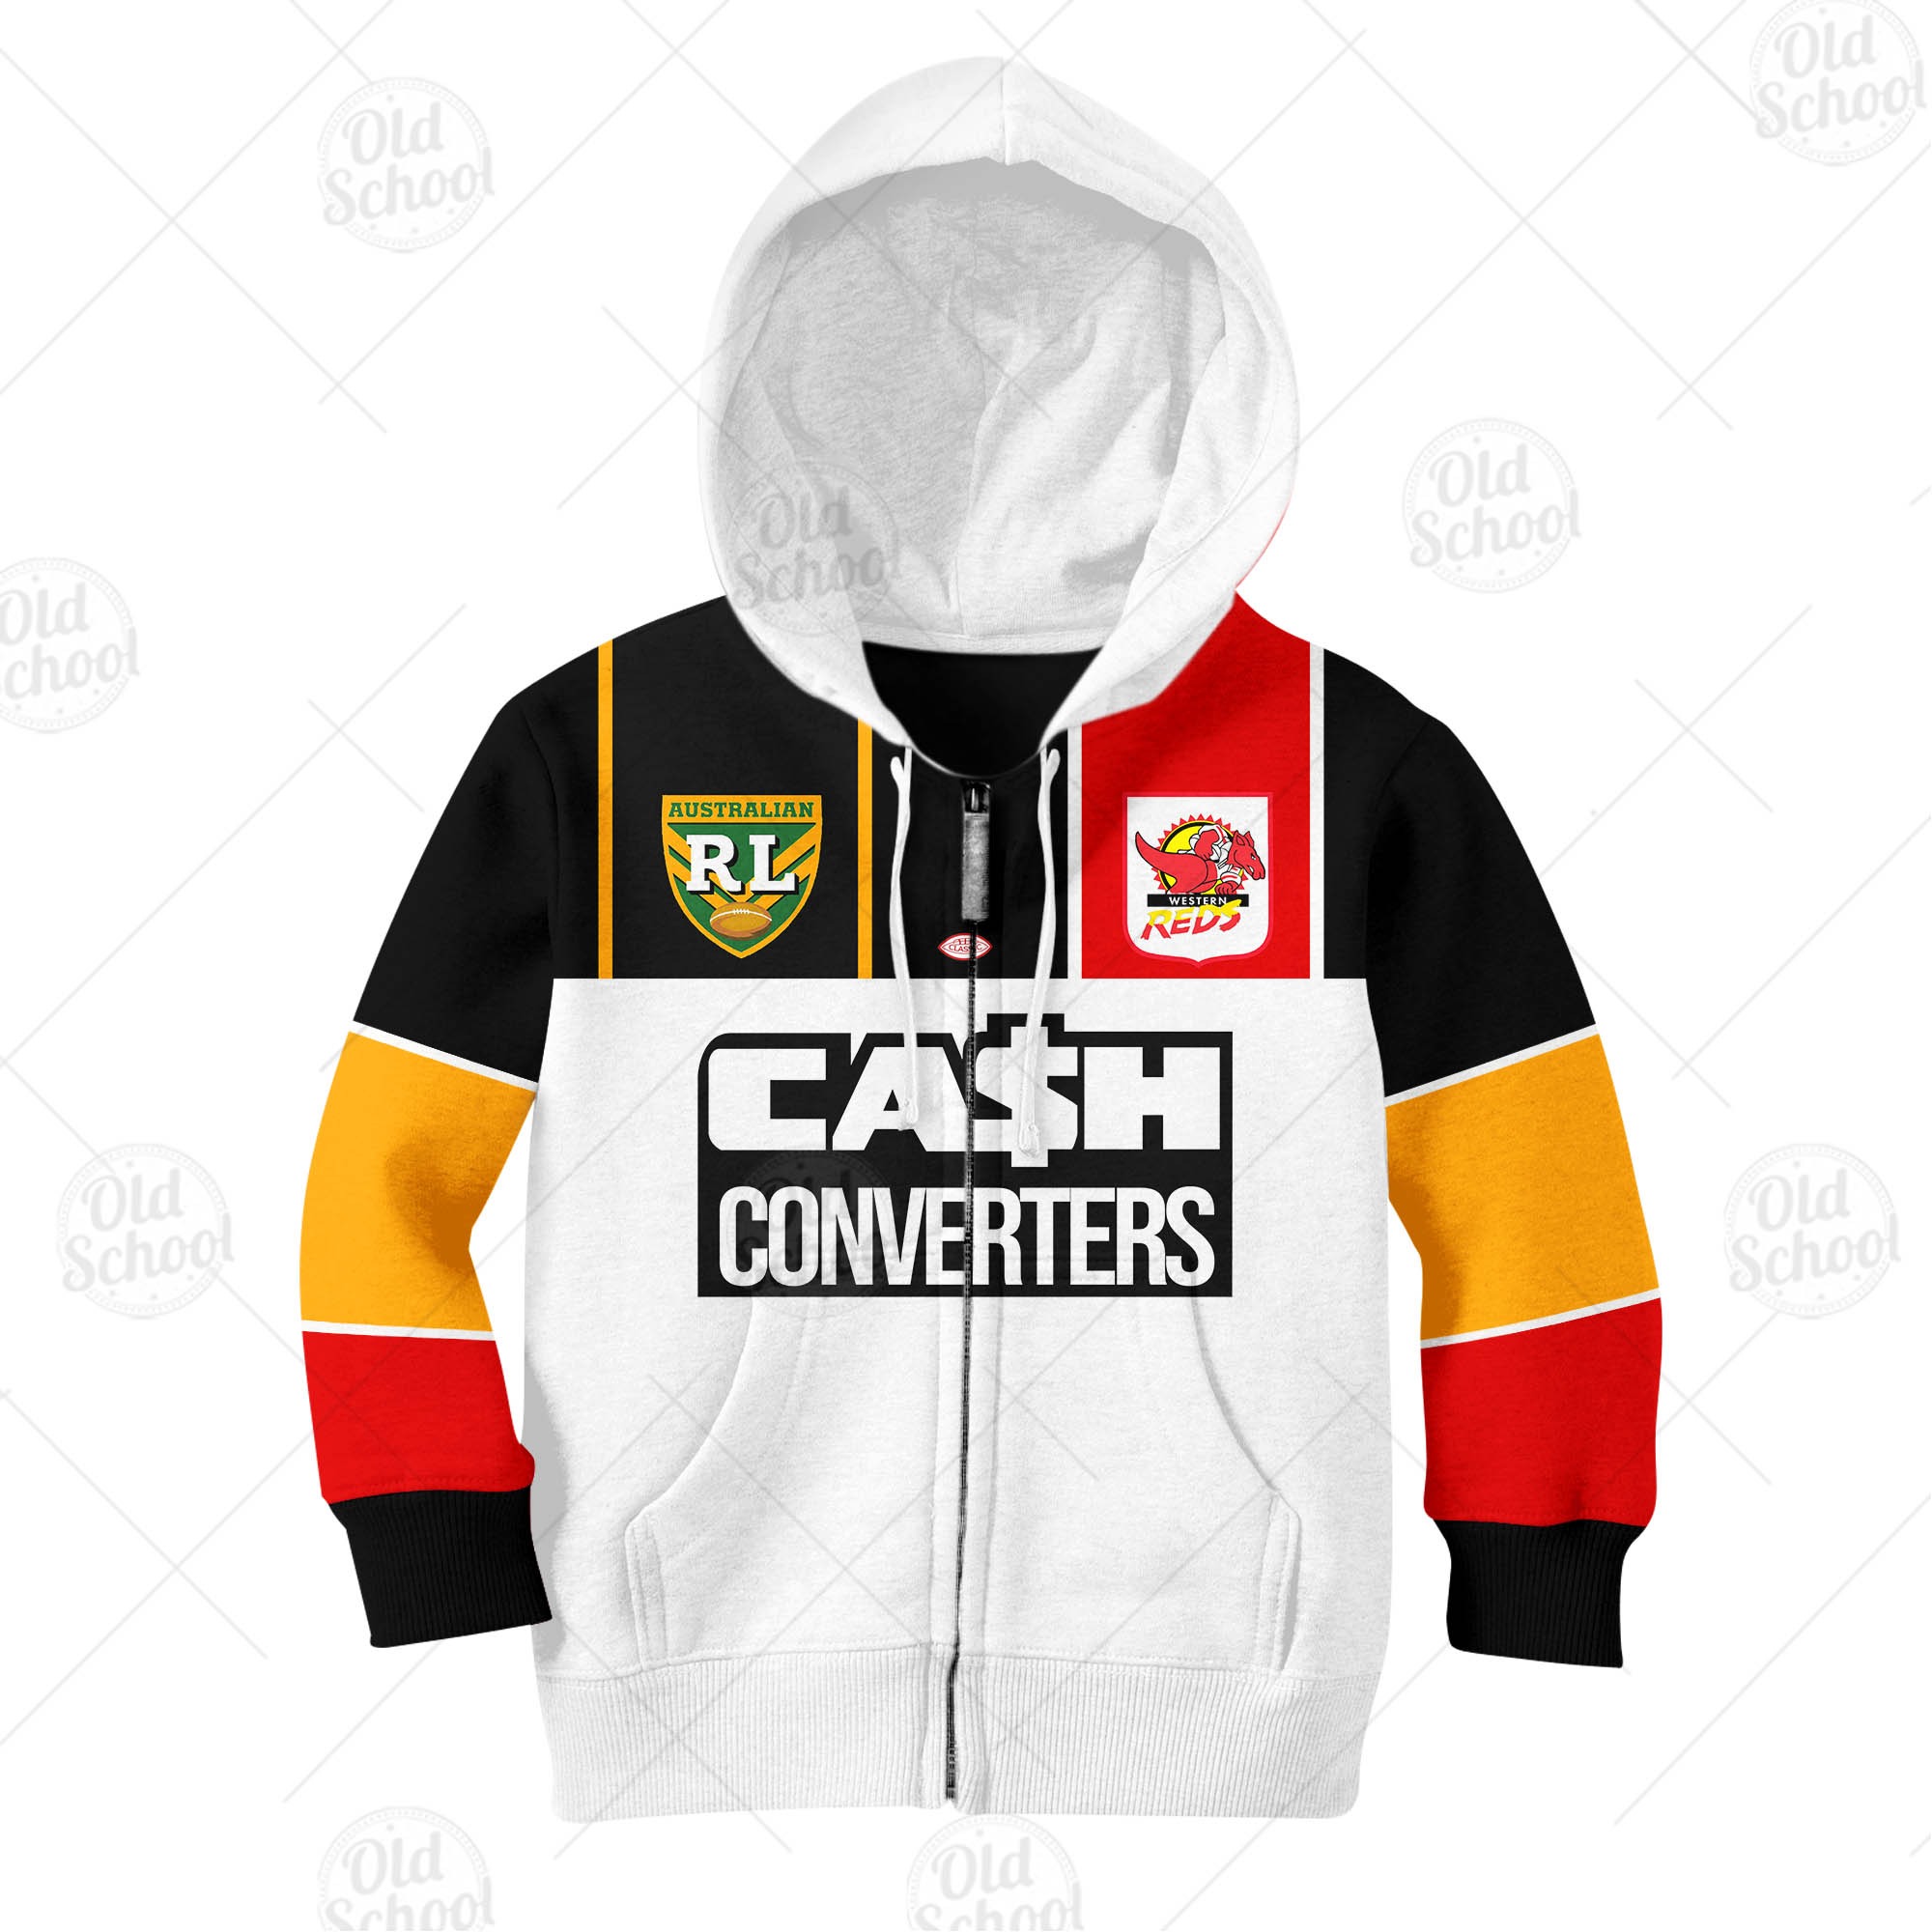 Balmain Tigers 1989 ARL/NRL Vintage Retro Heritage Jersey - OldSchoolThings  - Personalize Your Own New & Retro Sports Jerseys, Hoodies, T Shirts